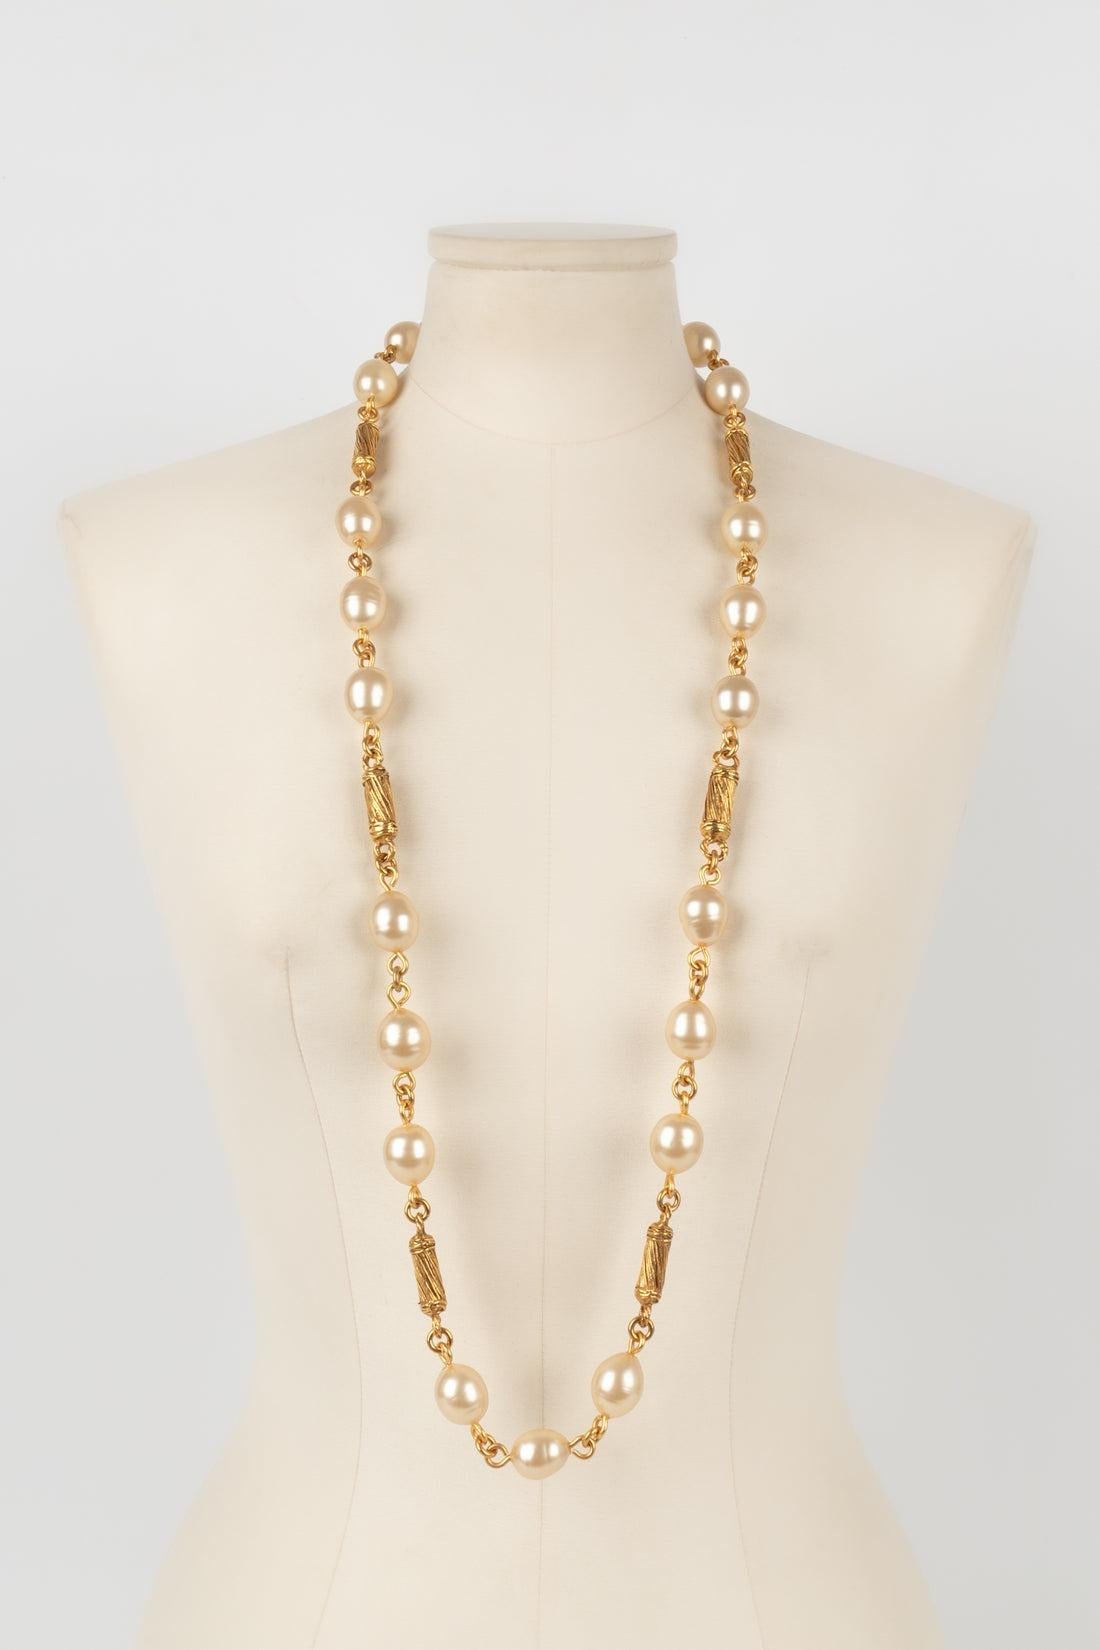 Chanel - (Made in France) Costume pearl necklace with golden metal elements. 1994 Fall-Winter Collection.

Additional information:
Condition: Very good condition
Dimensions: Length: 103 cm
Period: 20th Century

Seller Reference: CB16